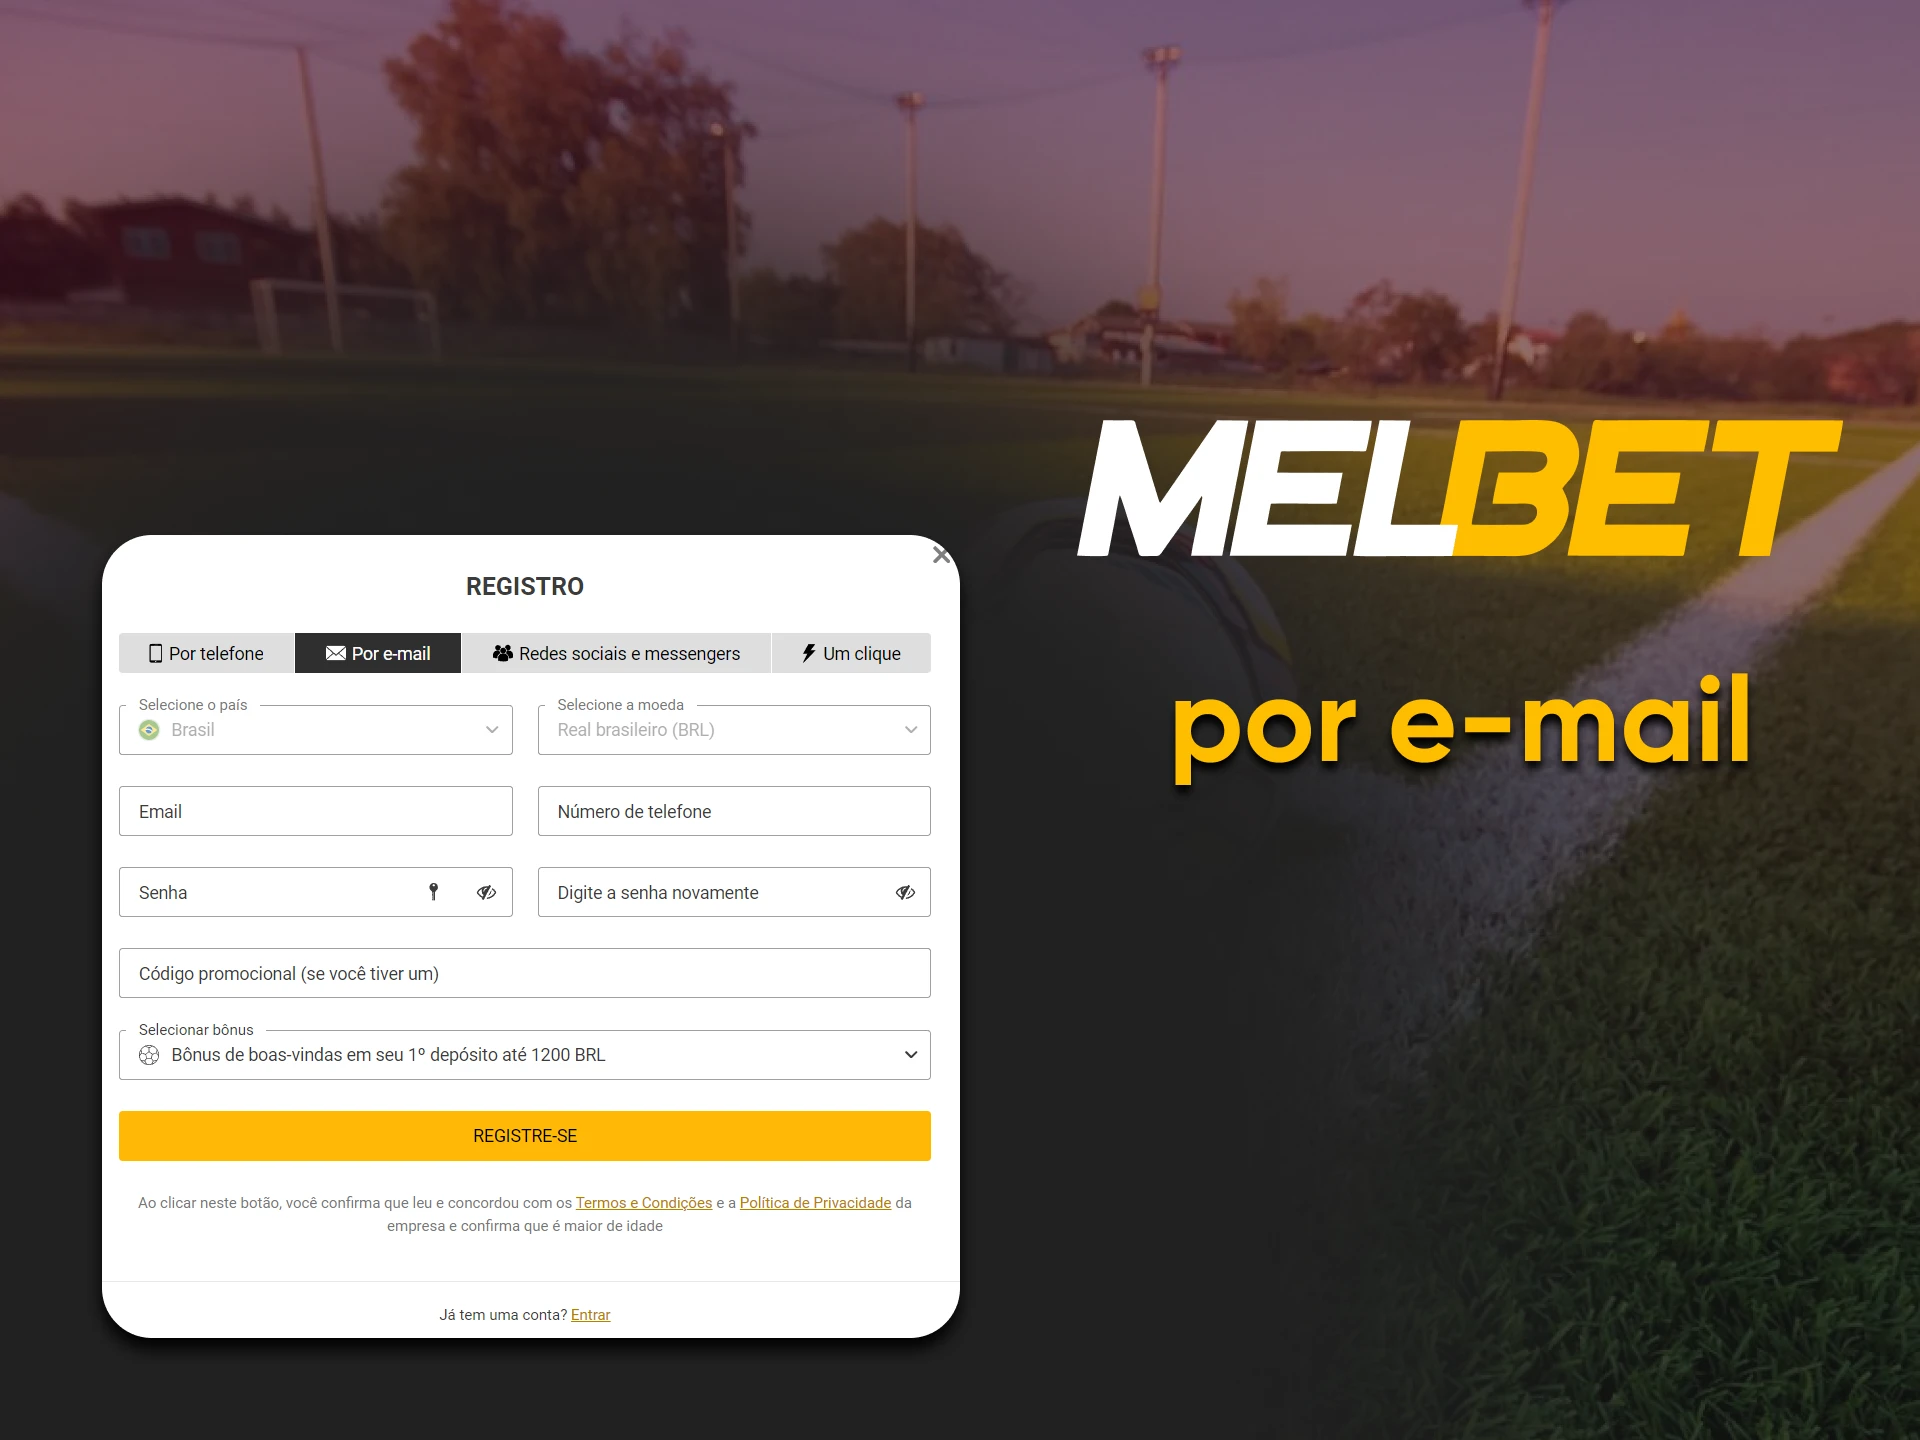 Register with Melbet by e-mail.